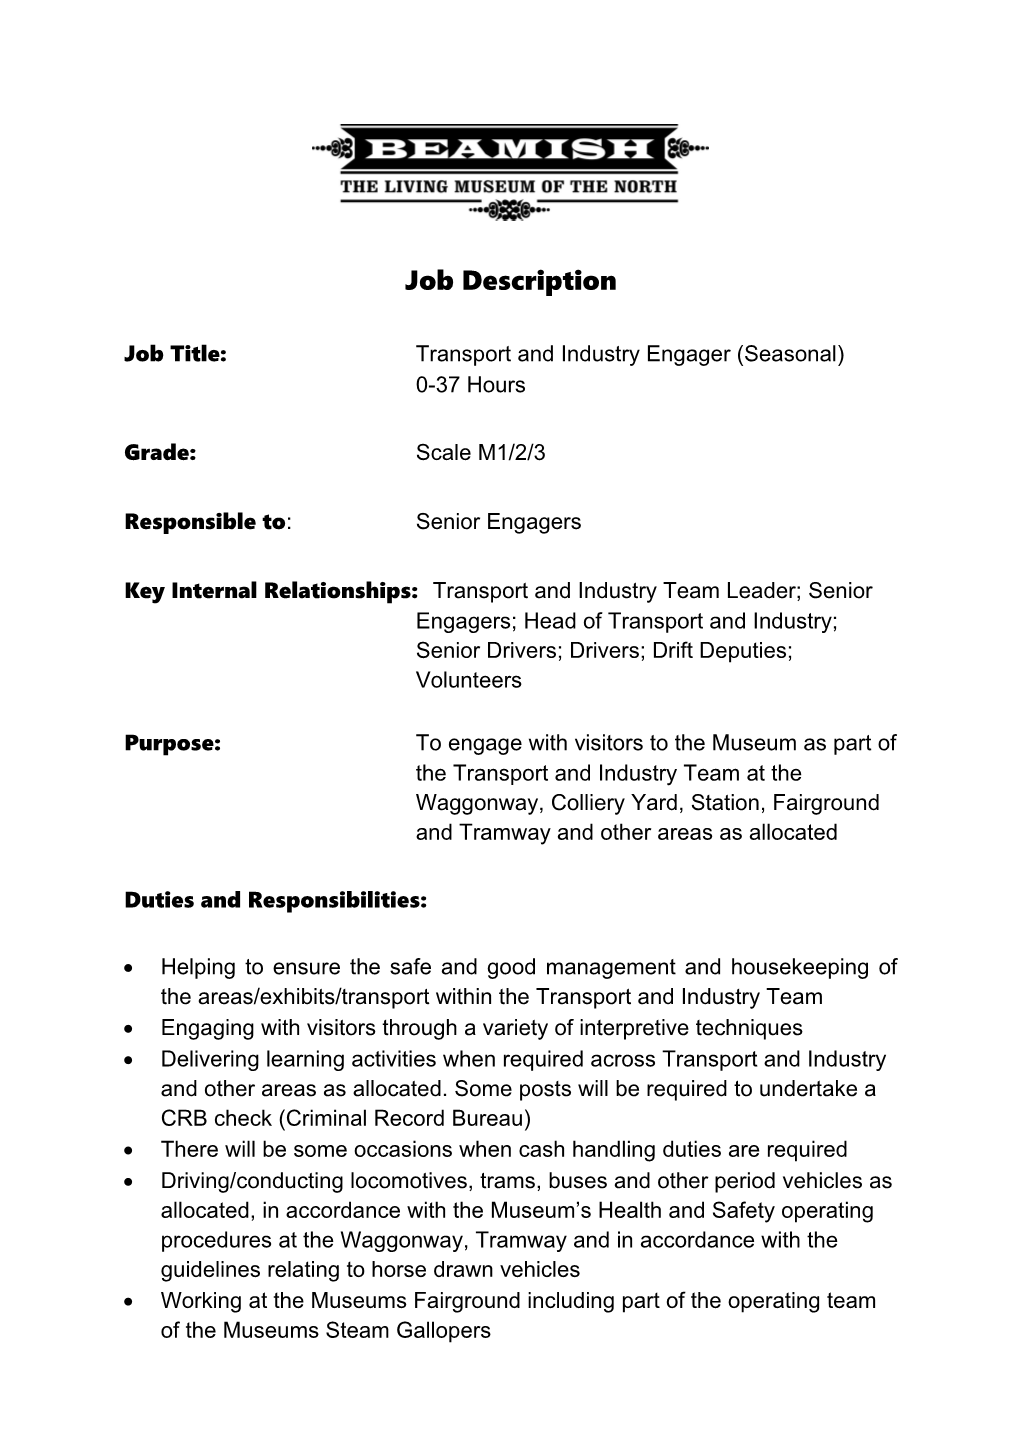 Job Title:Transport and Industry Engager(Seasonal)